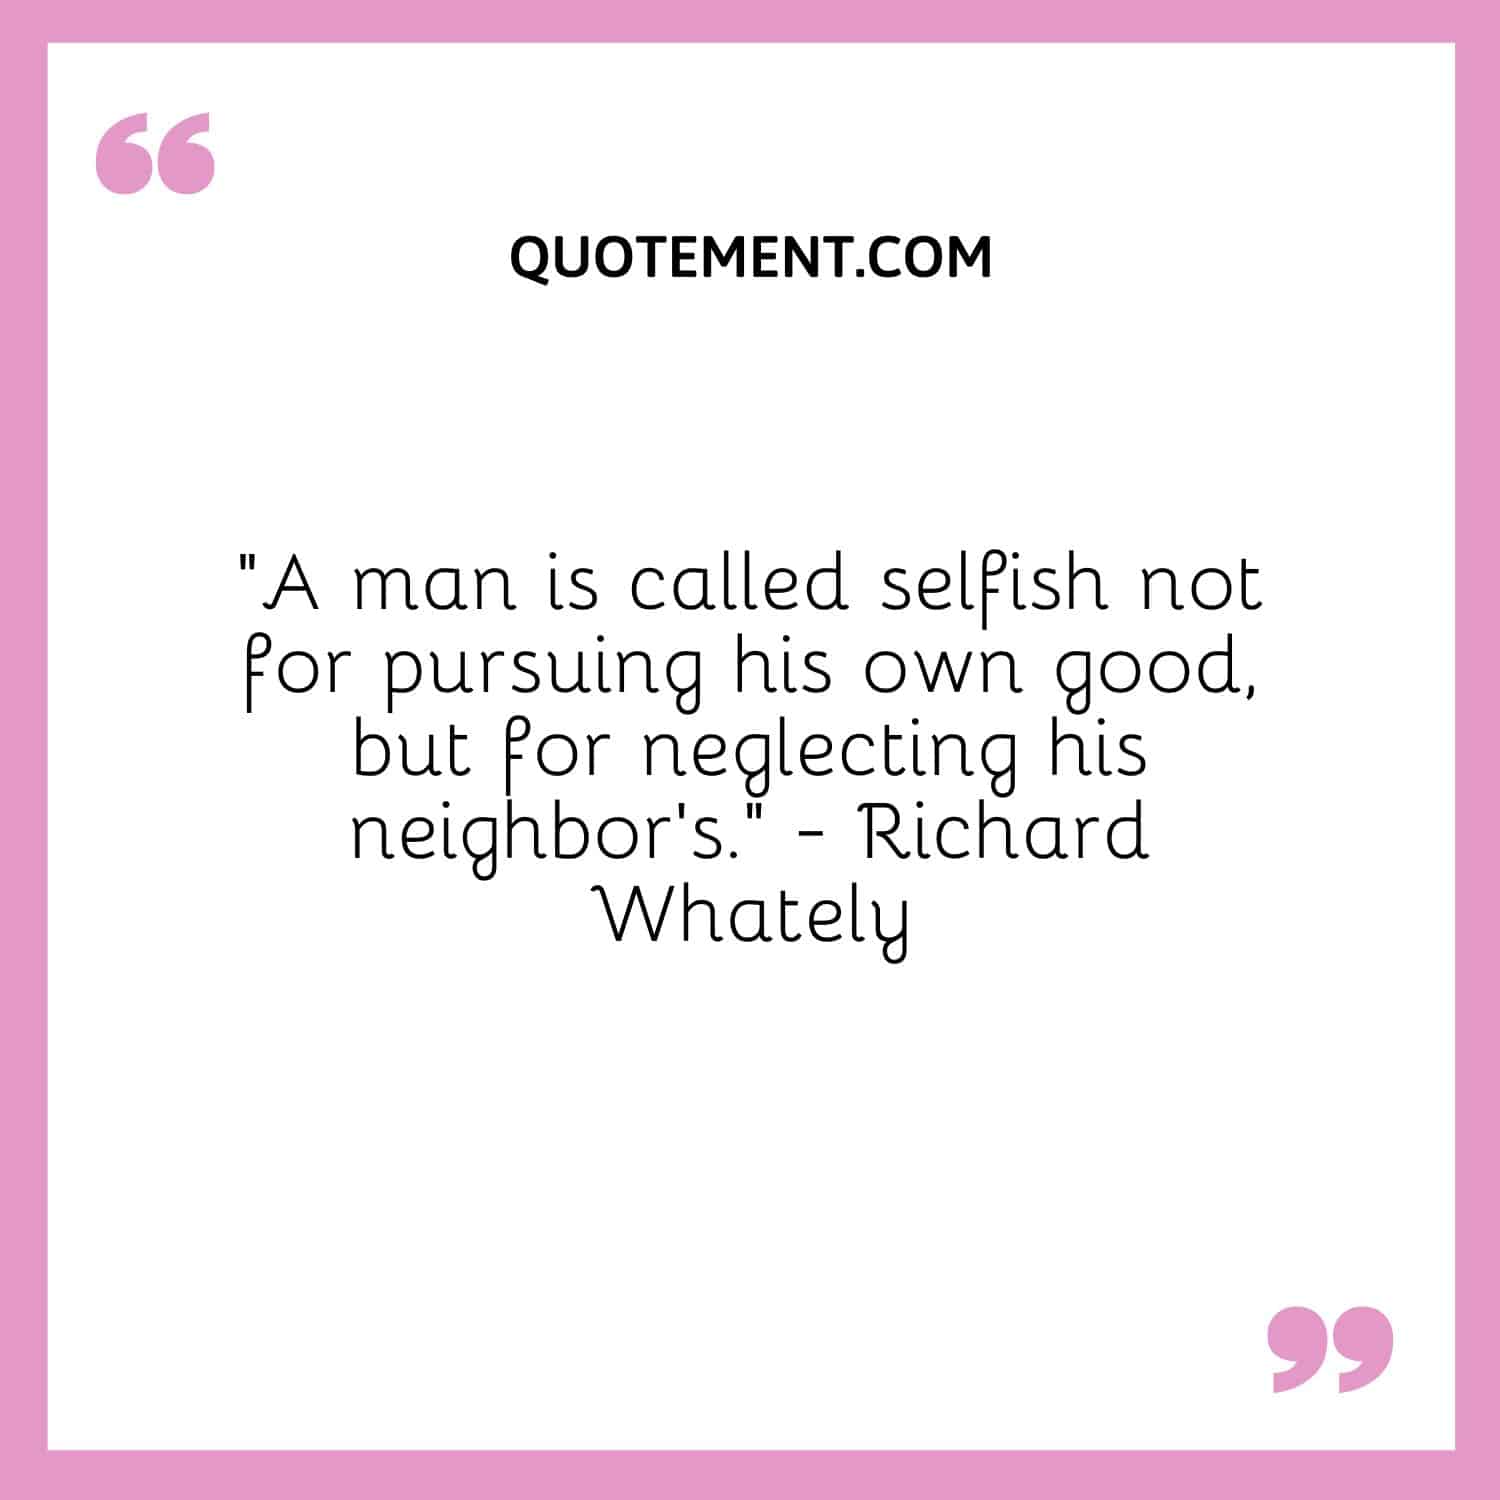 A man is called selfish not for pursuing his own good